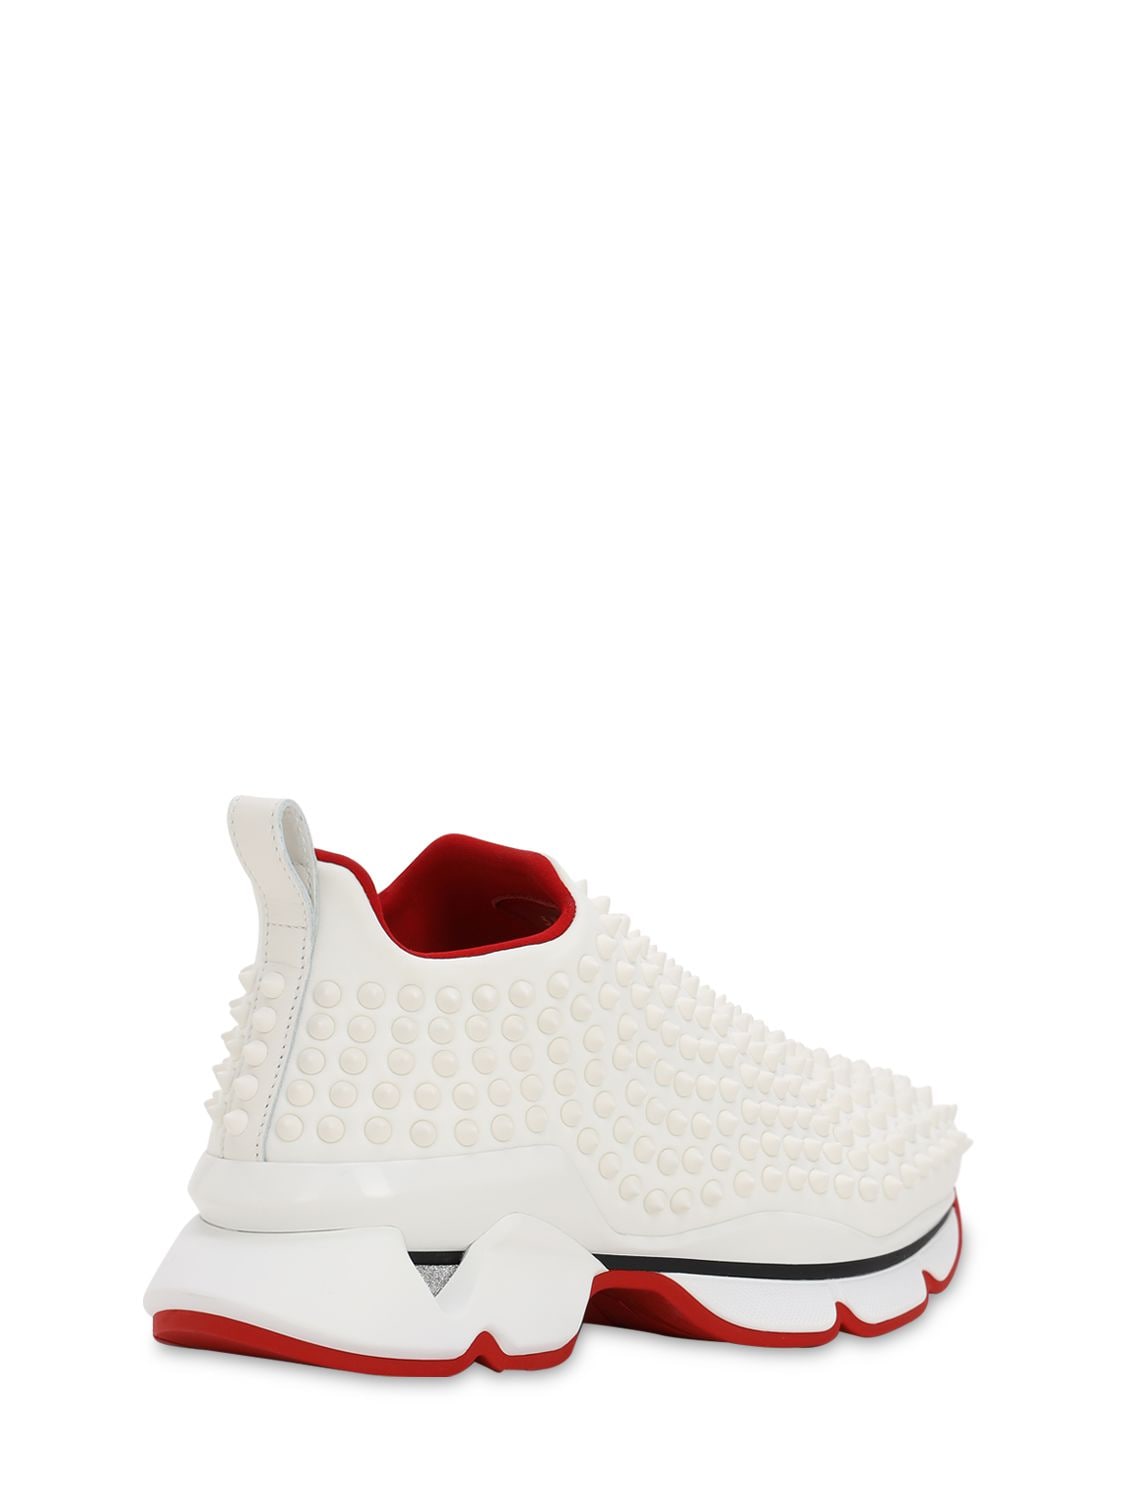 Christian Louboutin Spike Sock Donna Red Sole Trainers In White